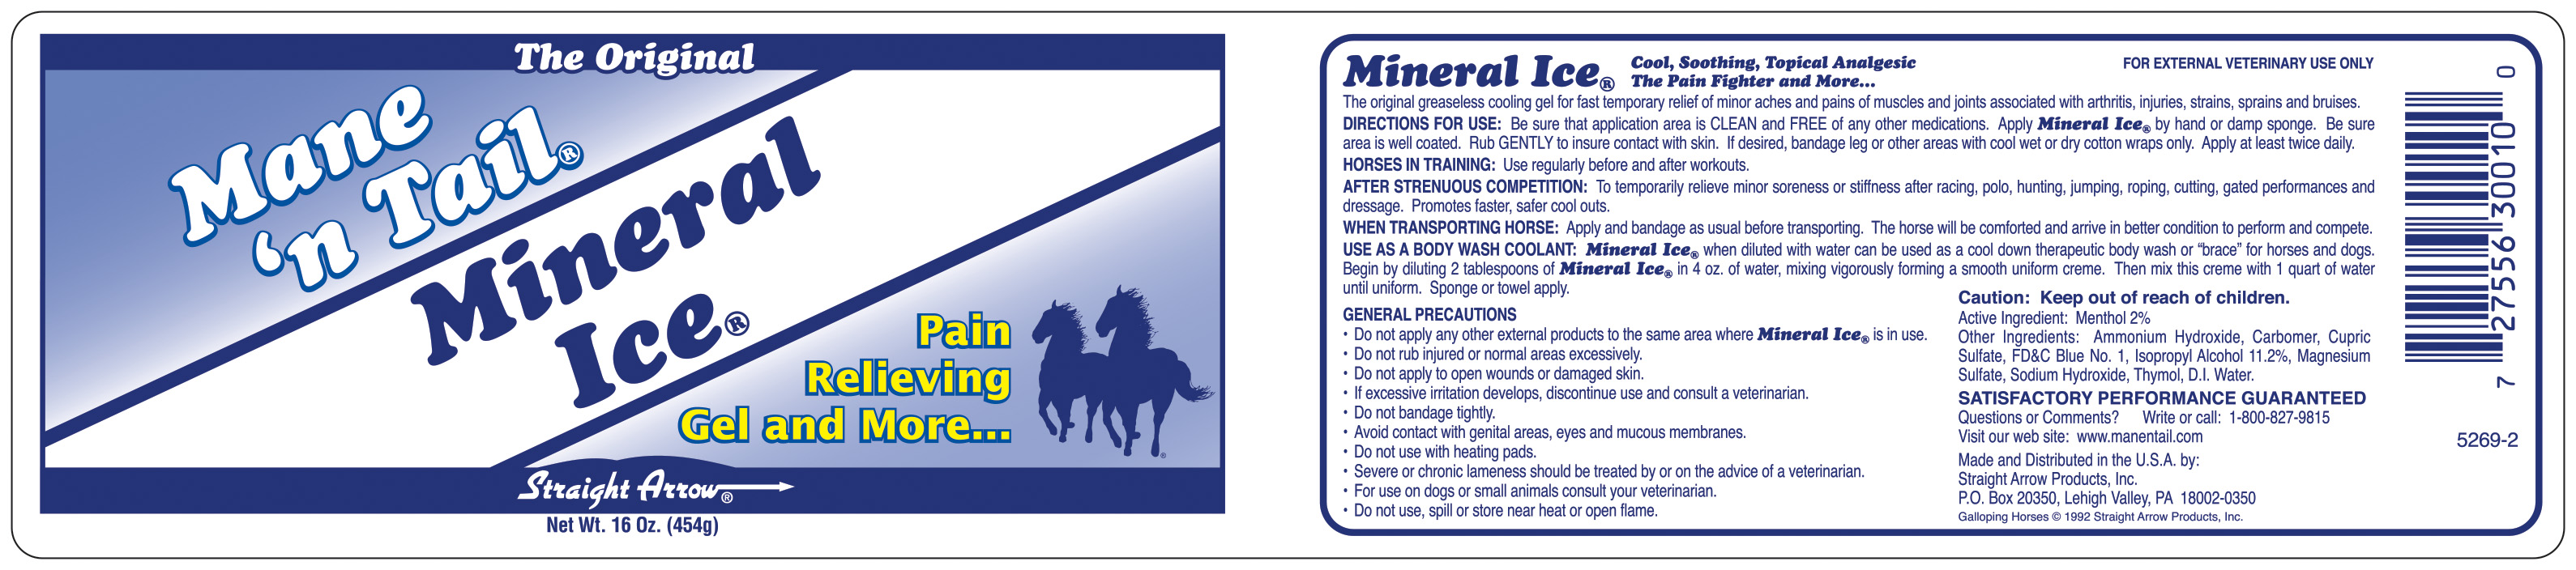 Image of Mineral Ice Label